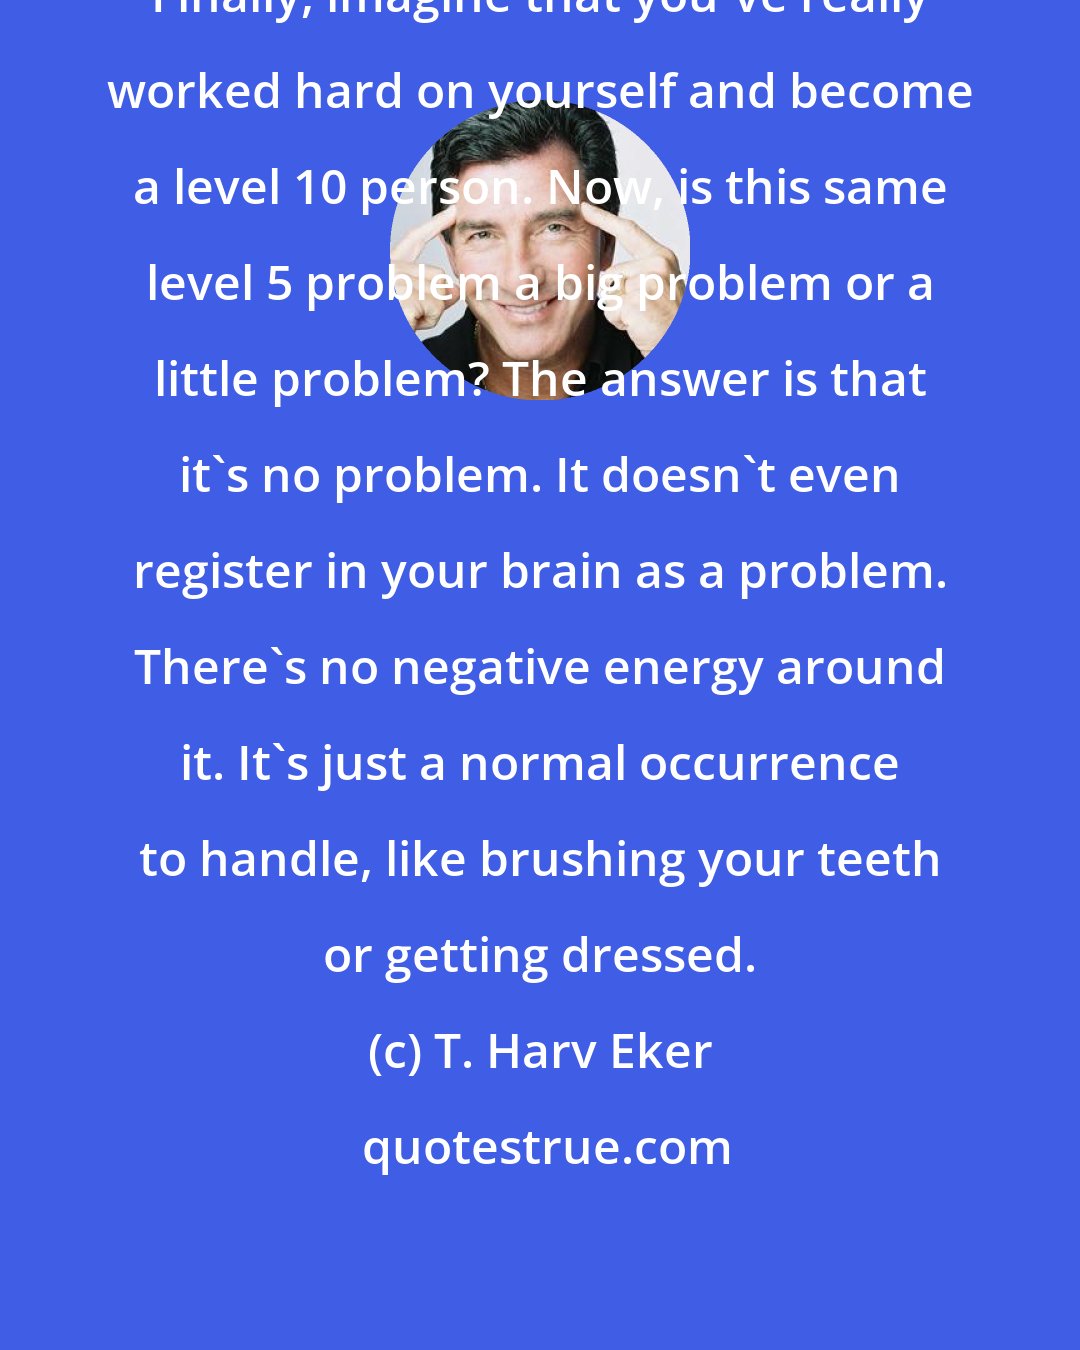 T. Harv Eker: Finally, imagine that you've really worked hard on yourself and become a level 10 person. Now, is this same level 5 problem a big problem or a little problem? The answer is that it's no problem. It doesn't even register in your brain as a problem. There's no negative energy around it. It's just a normal occurrence to handle, like brushing your teeth or getting dressed.